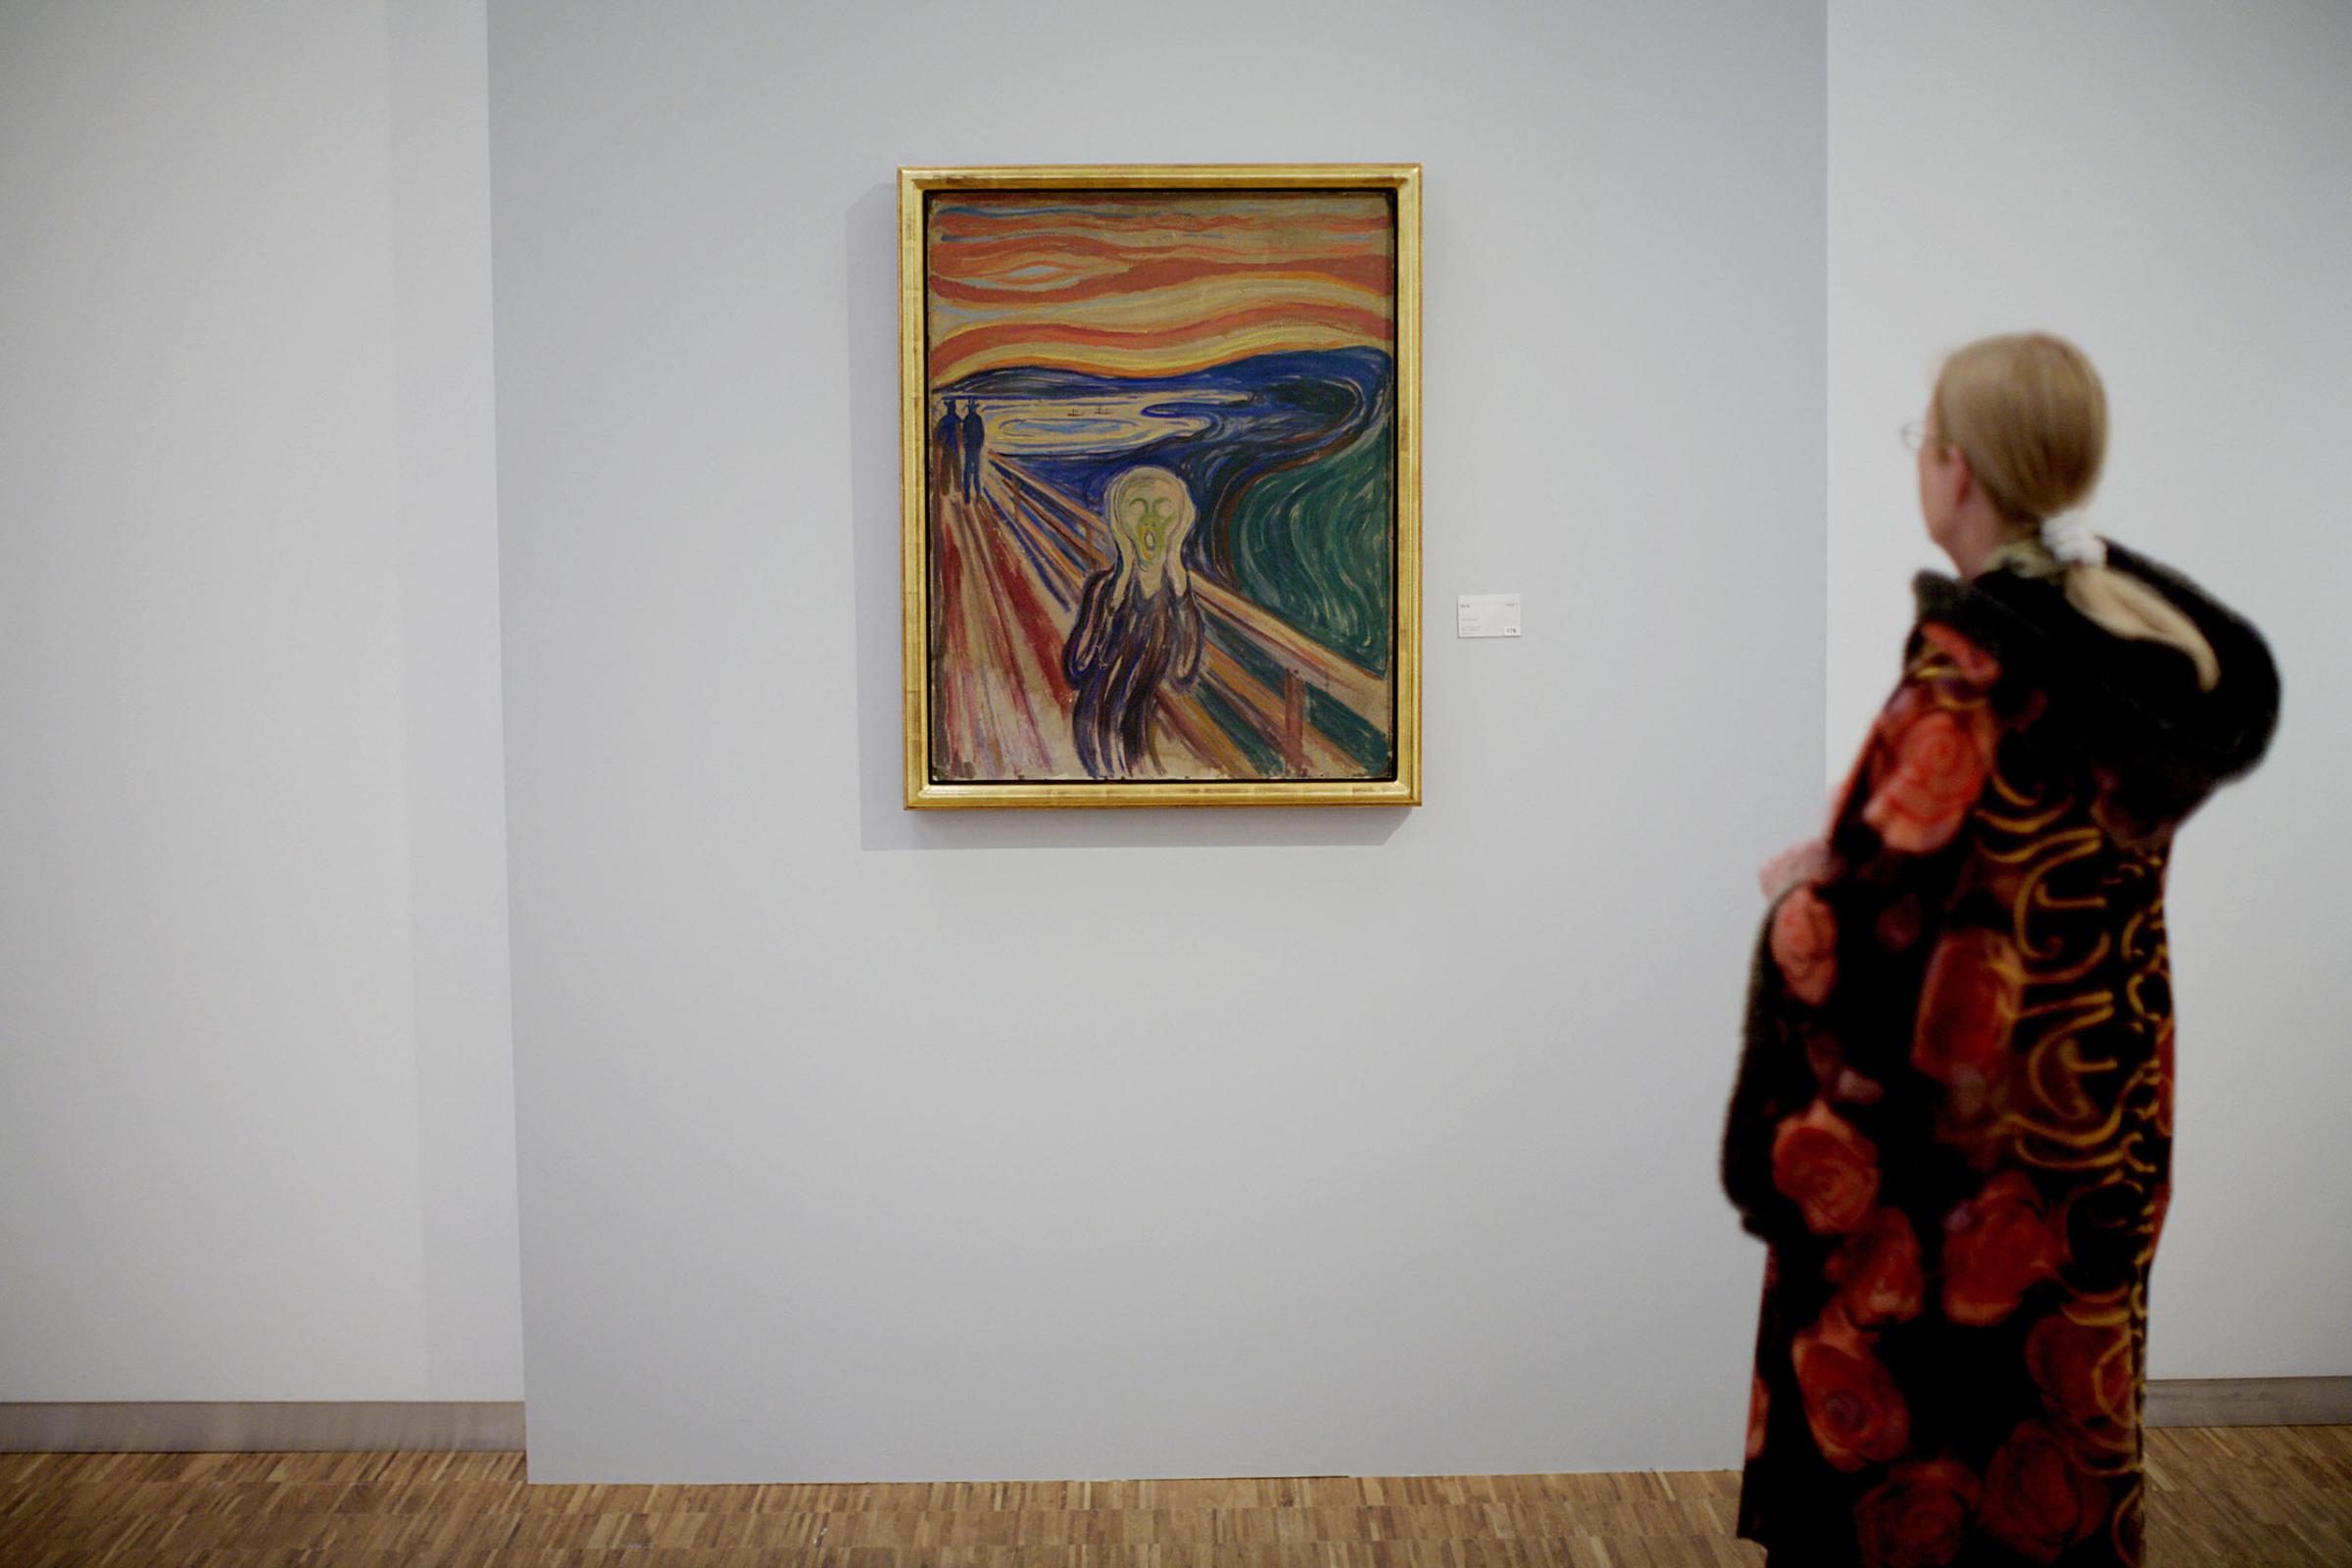 "The Scream" by expressionist painter Edvard Munch is on display for the public on May 23, 2008 at the Munch Museum in Oslo after it was restored and conserved following its spectacular theft from the museum in Aug. 2004.